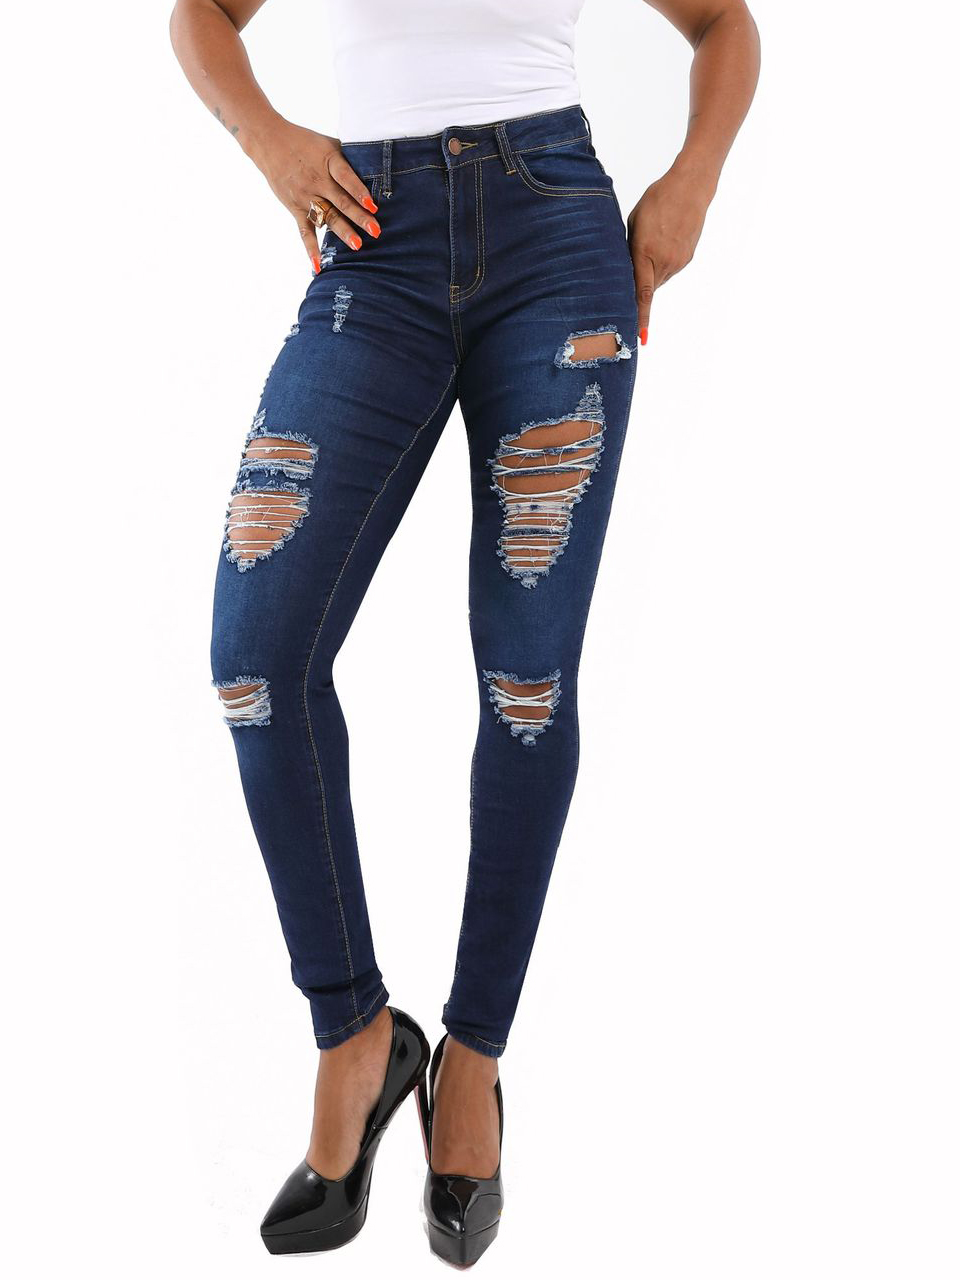 Smart Hot Sale Mid Waist Ripped Jeans For Women